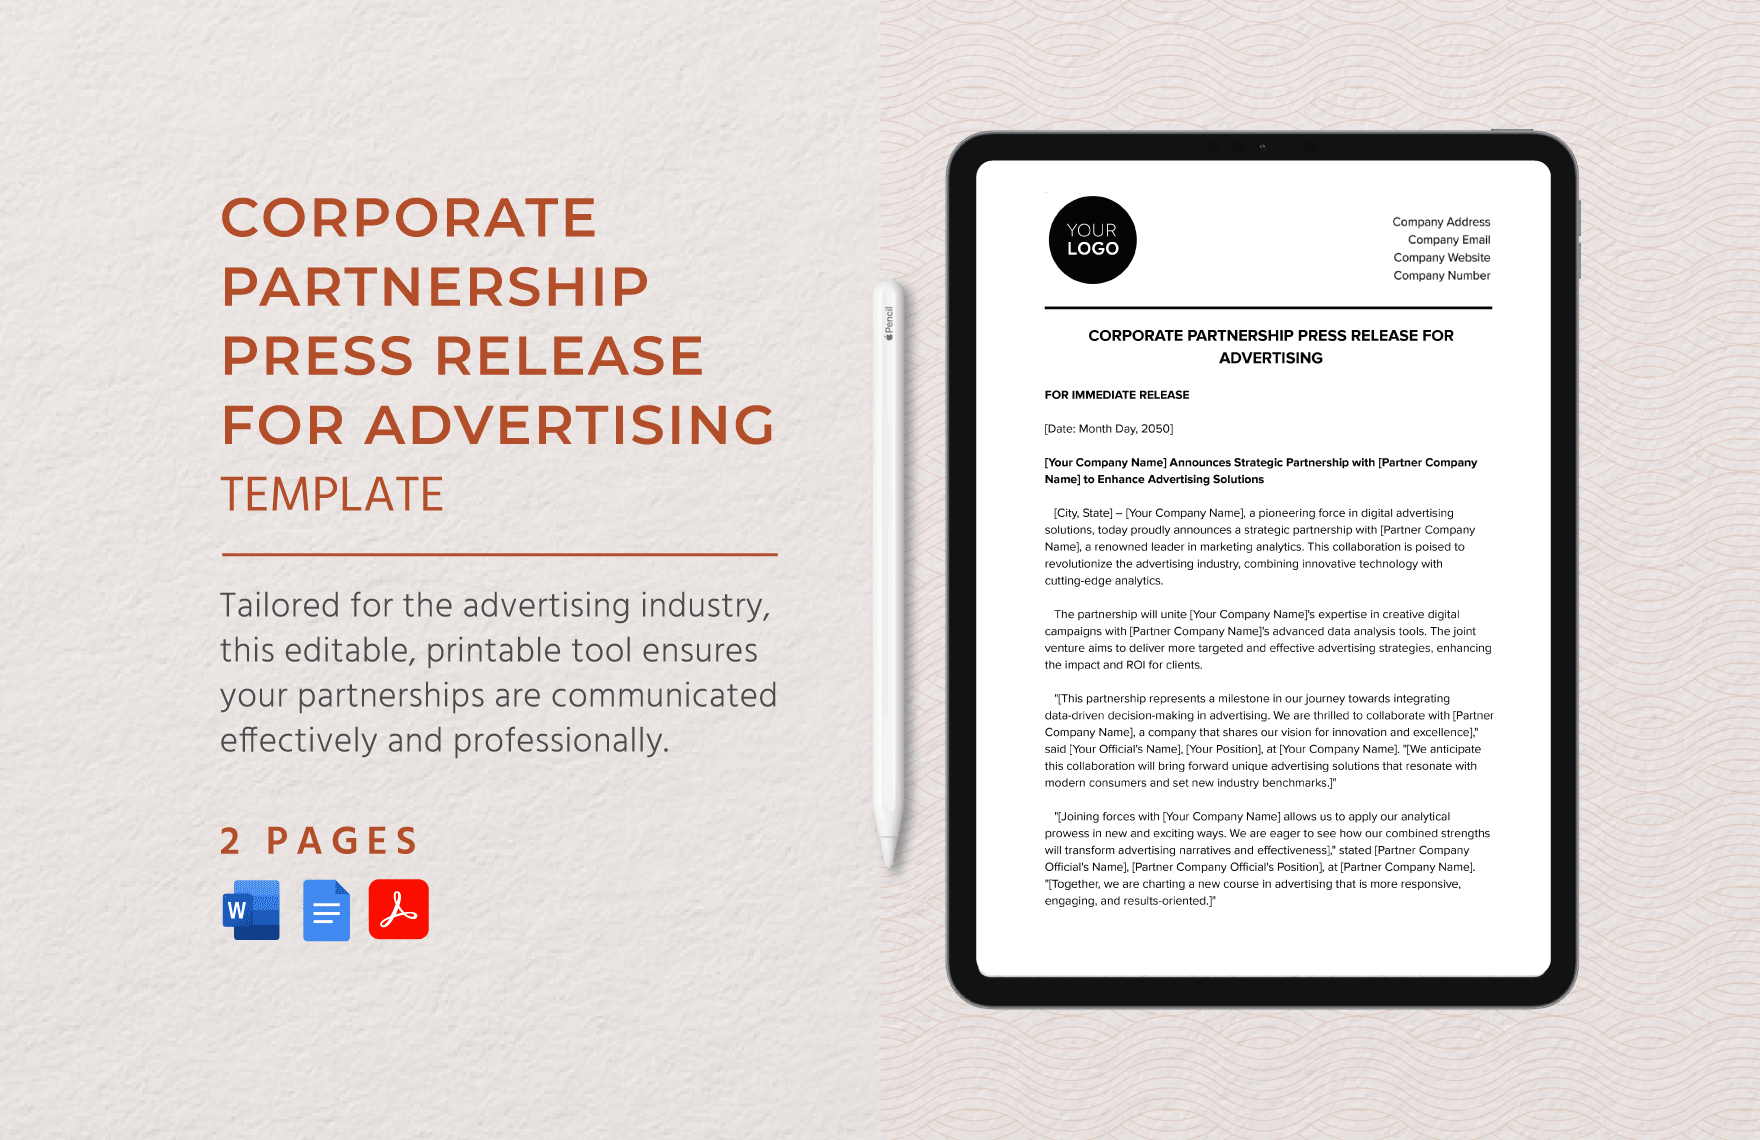 Corporate Partnership Press Release for Advertising Template